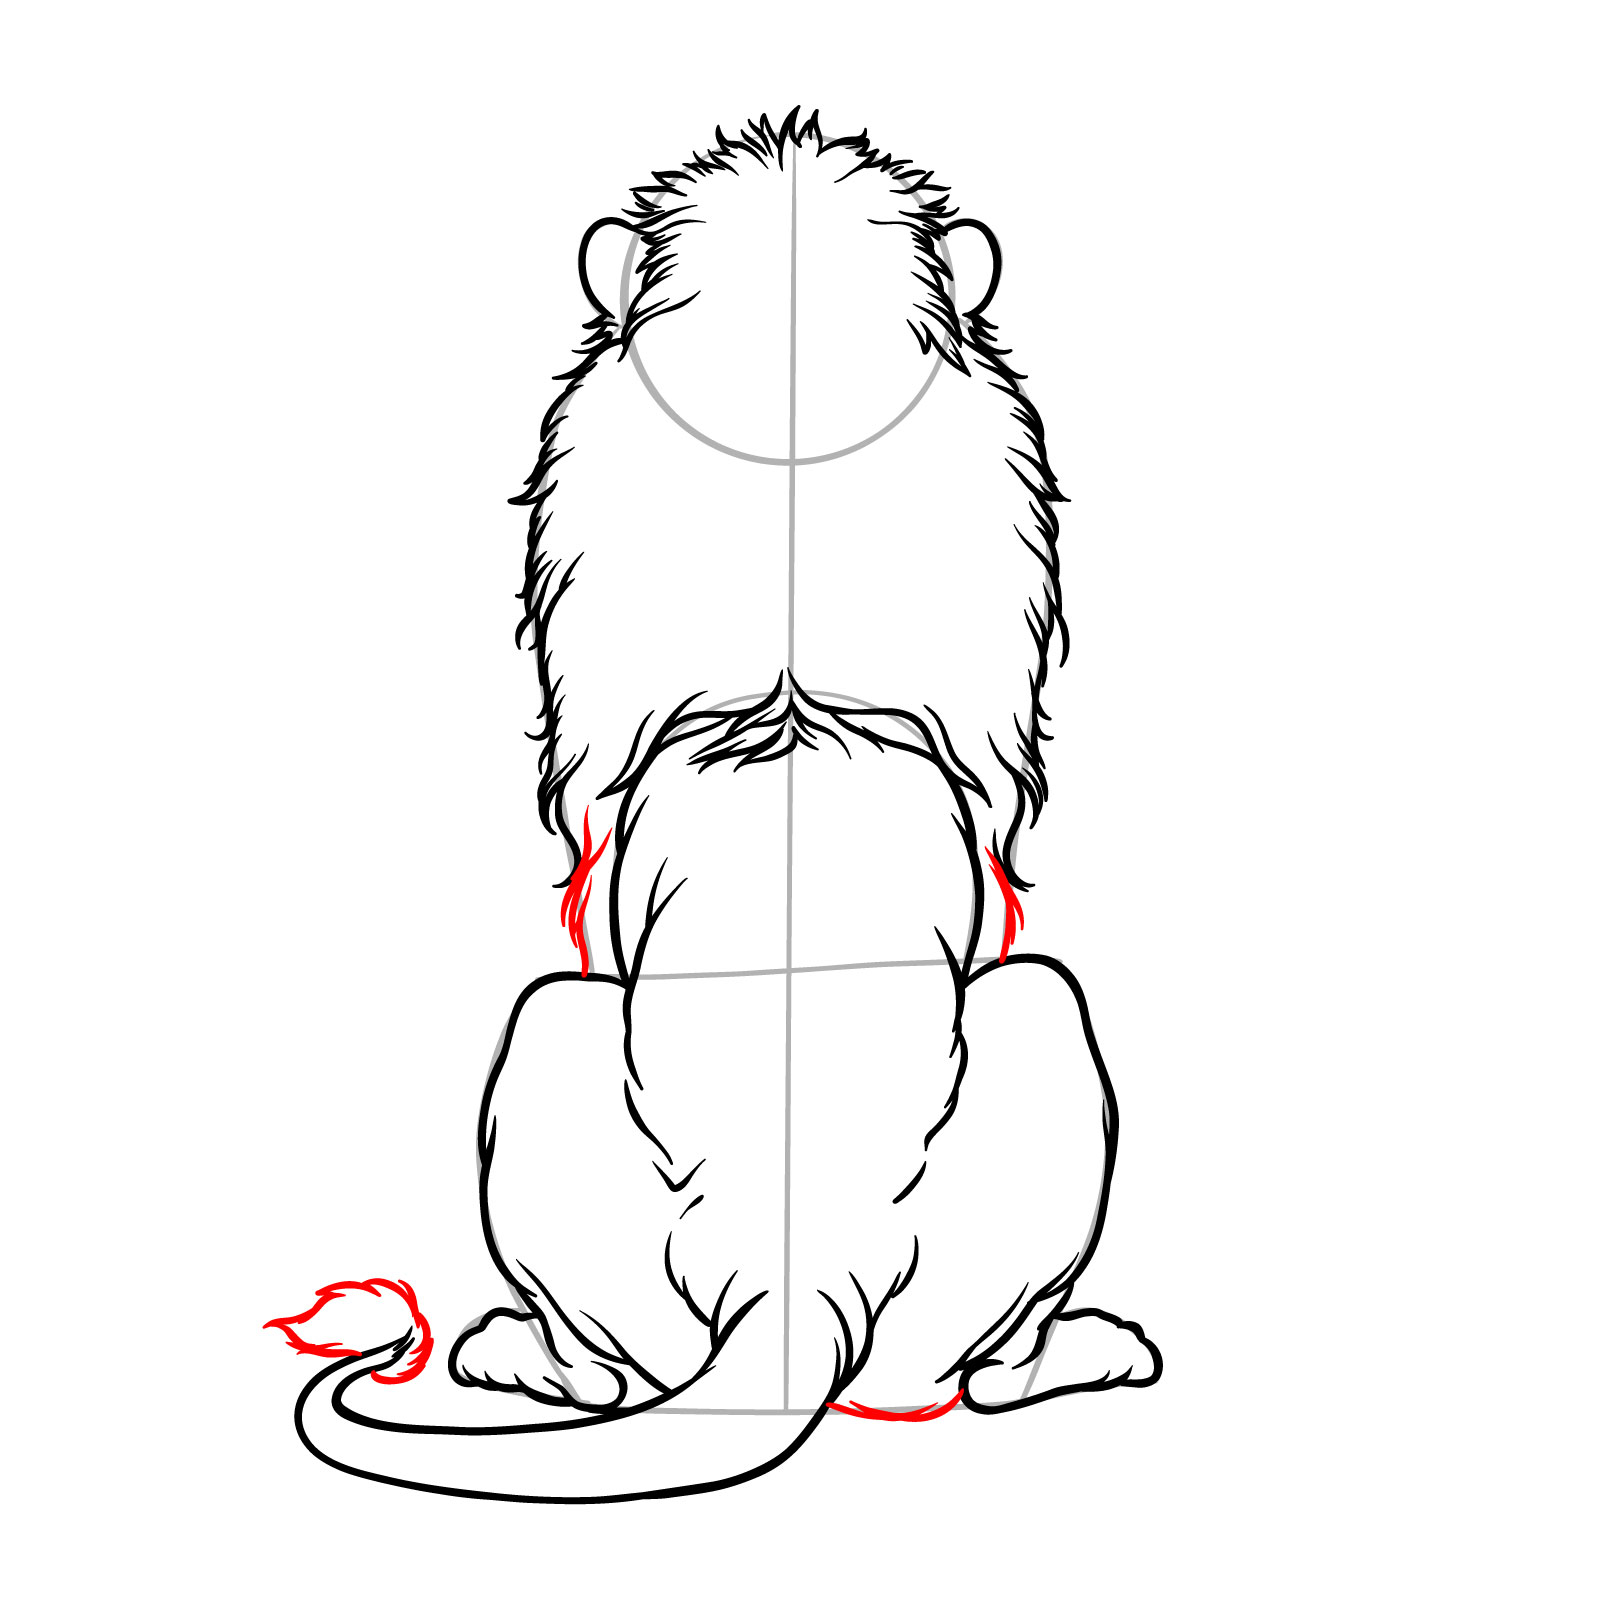 Step 10 in sketching a sitting lion from the back view, detailing the body and adding the tuft